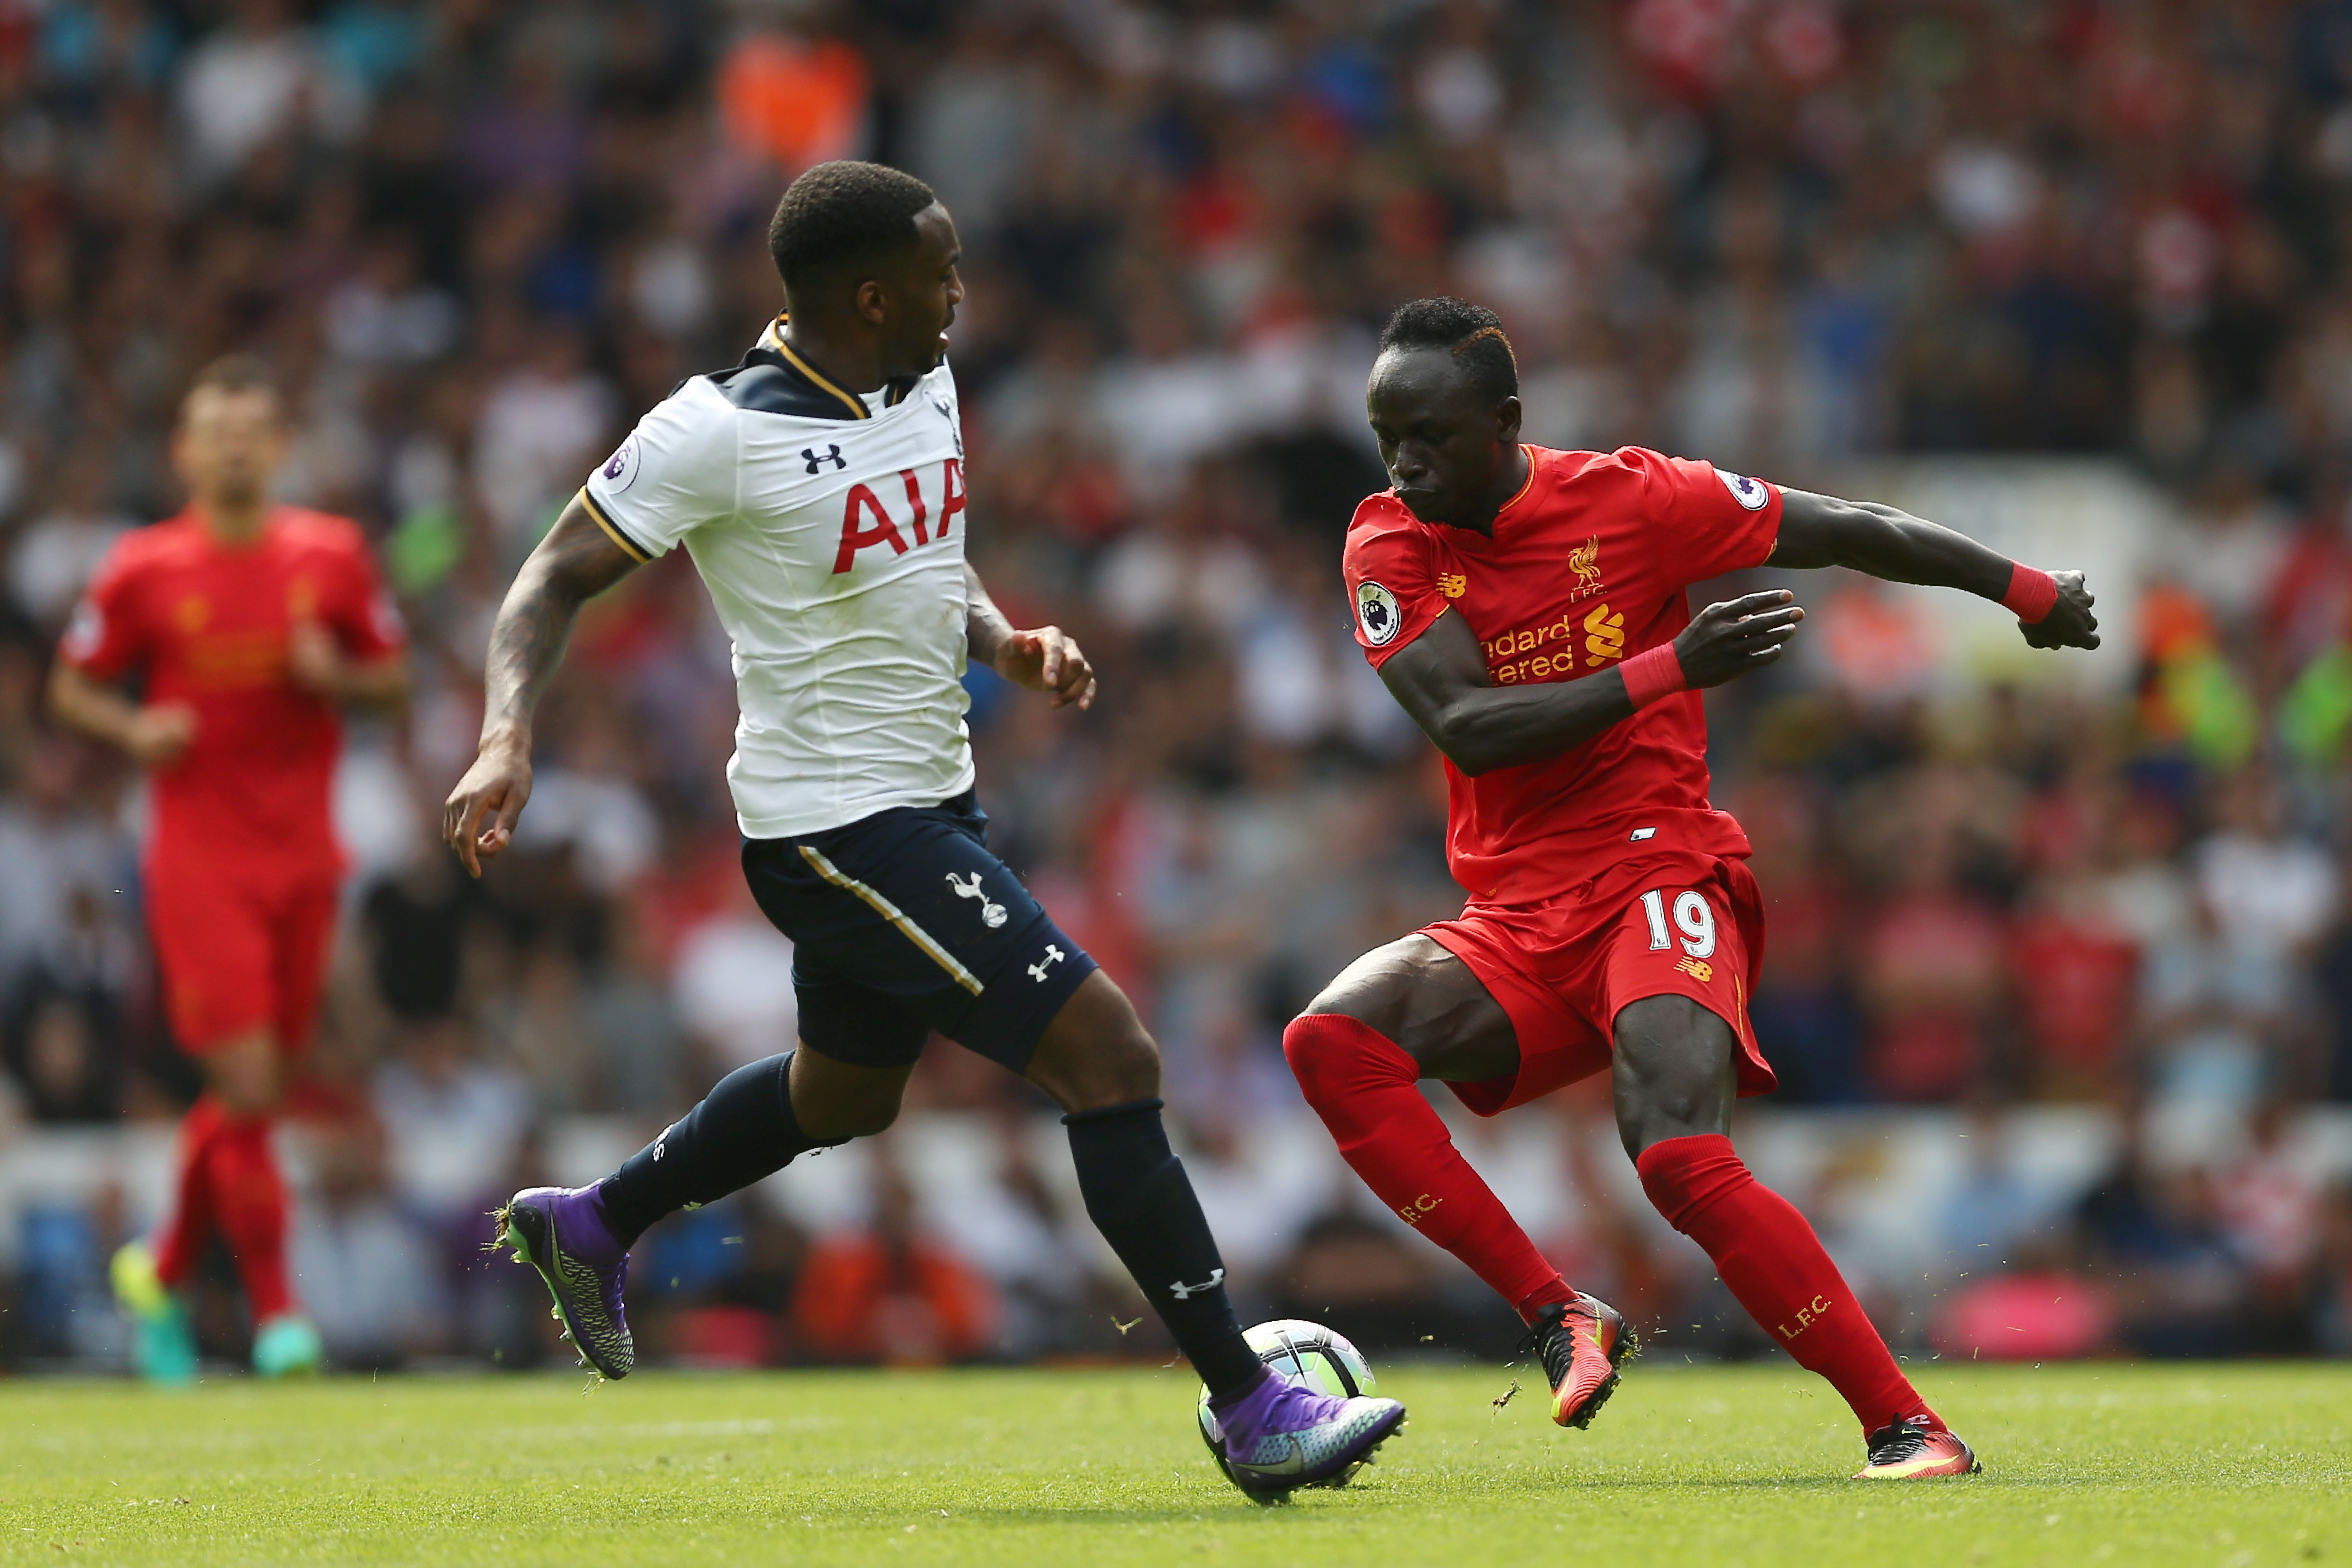 Tottenham Hotspur's English defender Danny Rose (L) vies with Liverpool's Senegalese midfielder Sadio Mane during the English Premier League football match between Tottenham Hotspur and Liverpool at White Hart Lane in London, on August 27, 2016. / AFP / JUSTIN TALLIS / RESTRICTED TO EDITORIAL USE. No use with unauthorized audio, video, data, fixture lists, club/league logos or 'live' services. Online in-match use limited to 75 images, no video emulation. No use in betting, games or single club/league/player publications.  /         (Photo credit should read JUSTIN TALLIS/AFP/Getty Images)